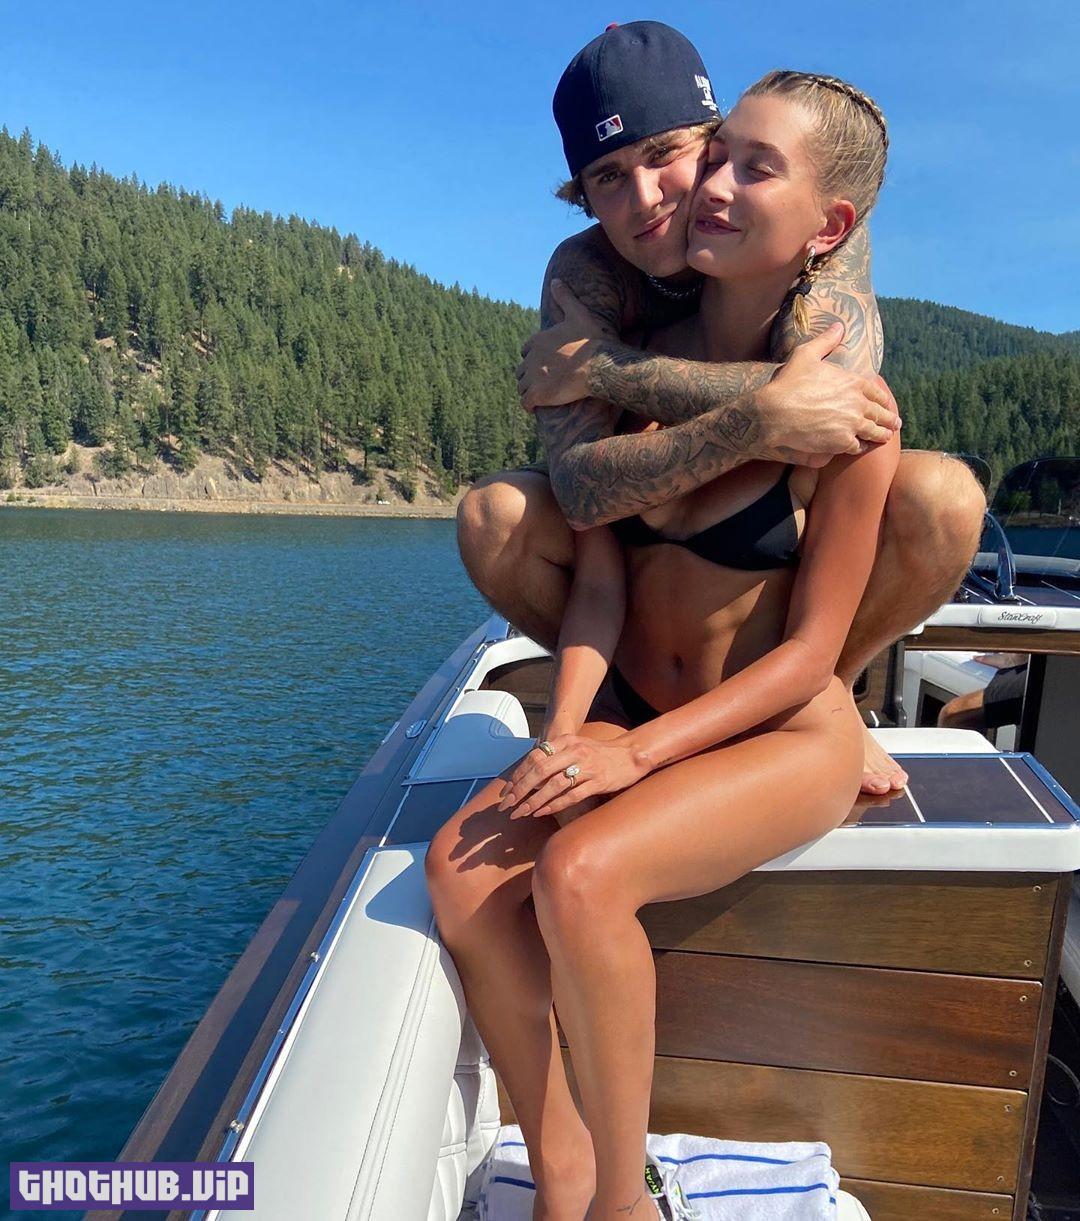 Hailey And Justin Bieber Showed How To Spend A Romantic Weekend